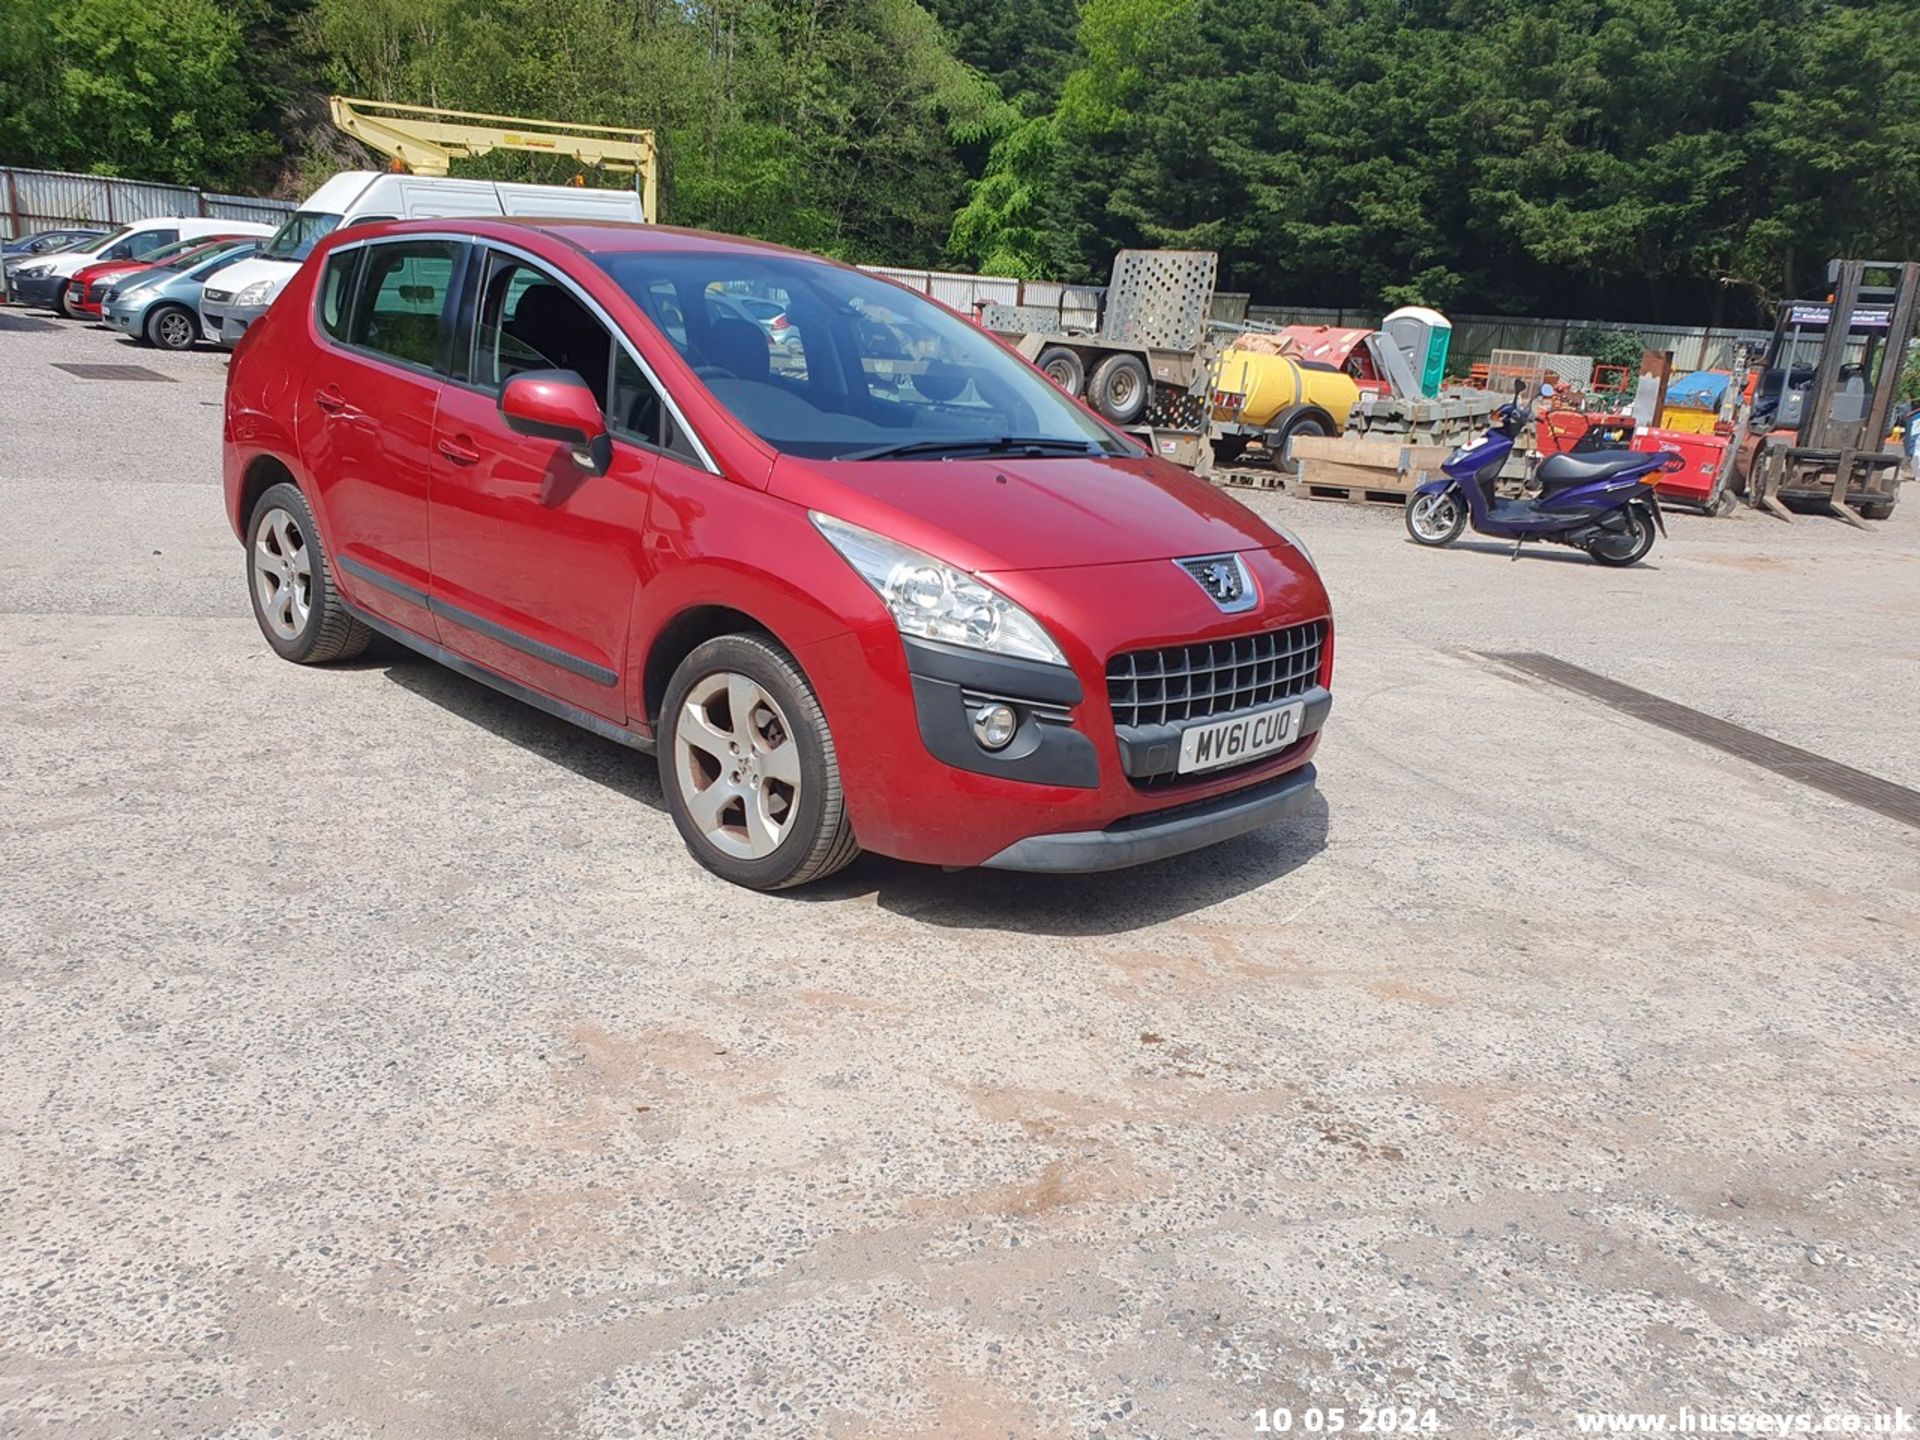 11/61 PEUGEOT 3008 SPORT E-HDI S-A - 1560cc 5dr Hatchback (Red, 89k) - Image 3 of 49